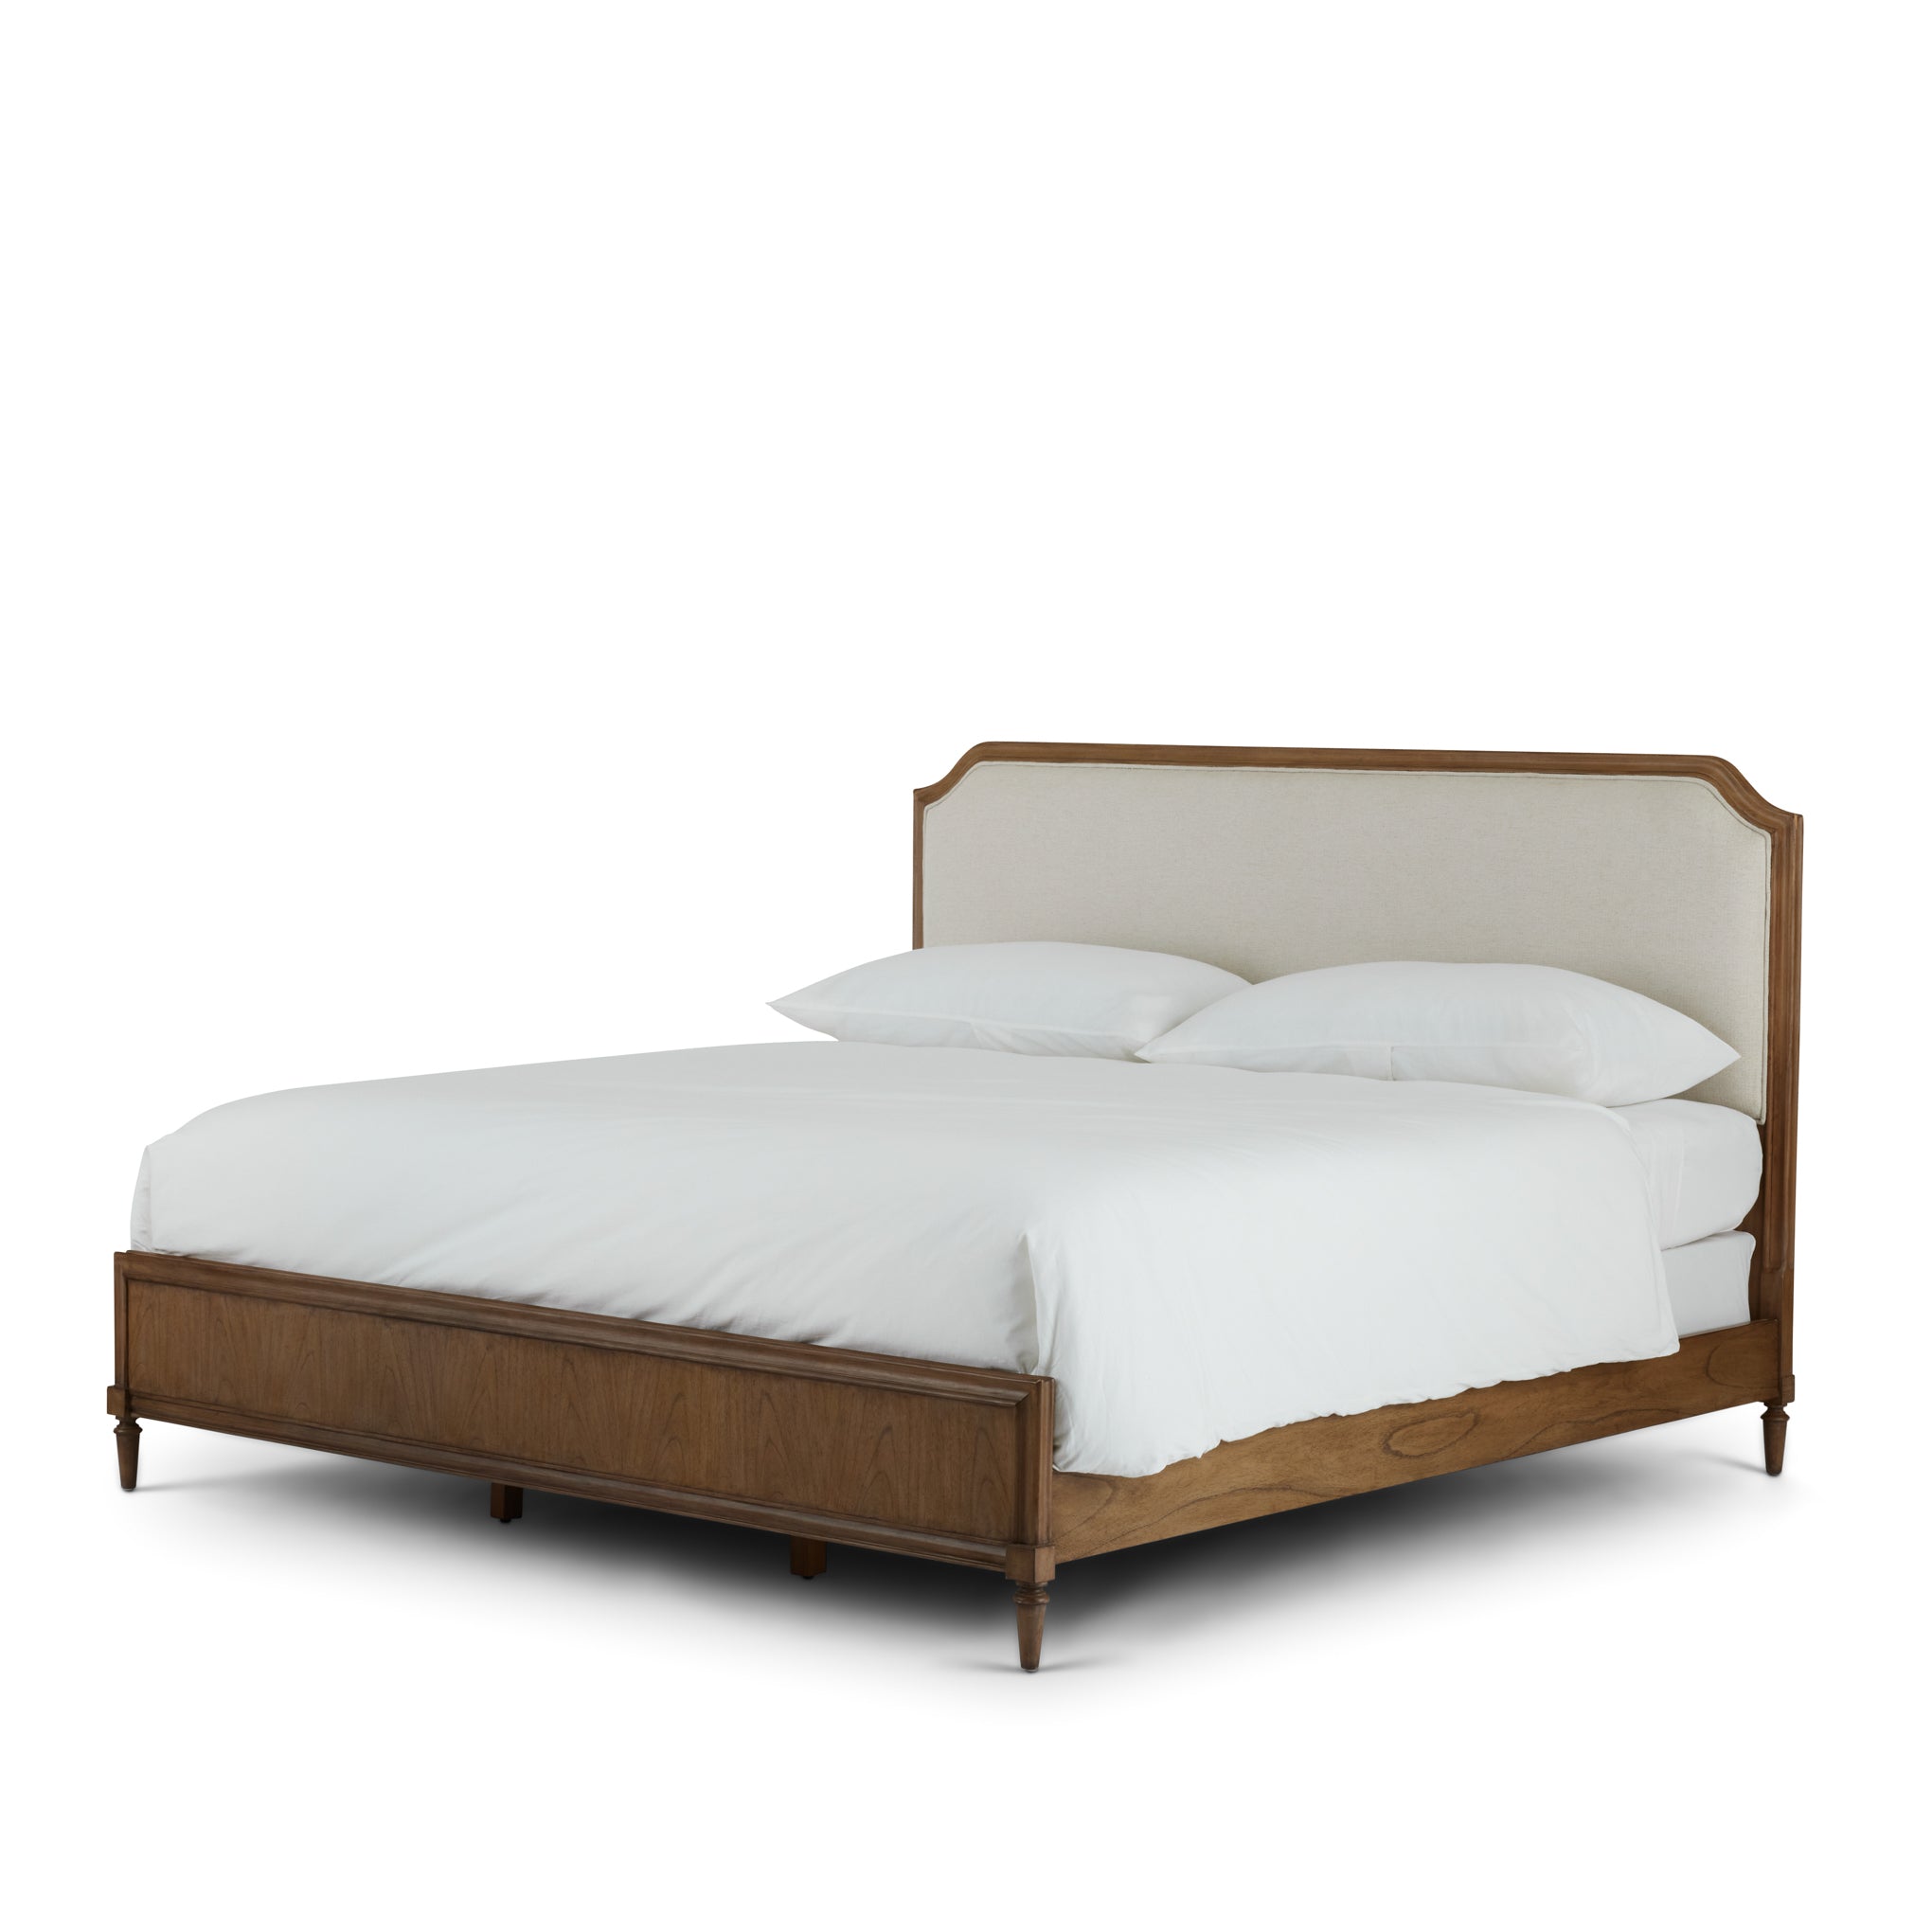 Corinne Upholstered Bed